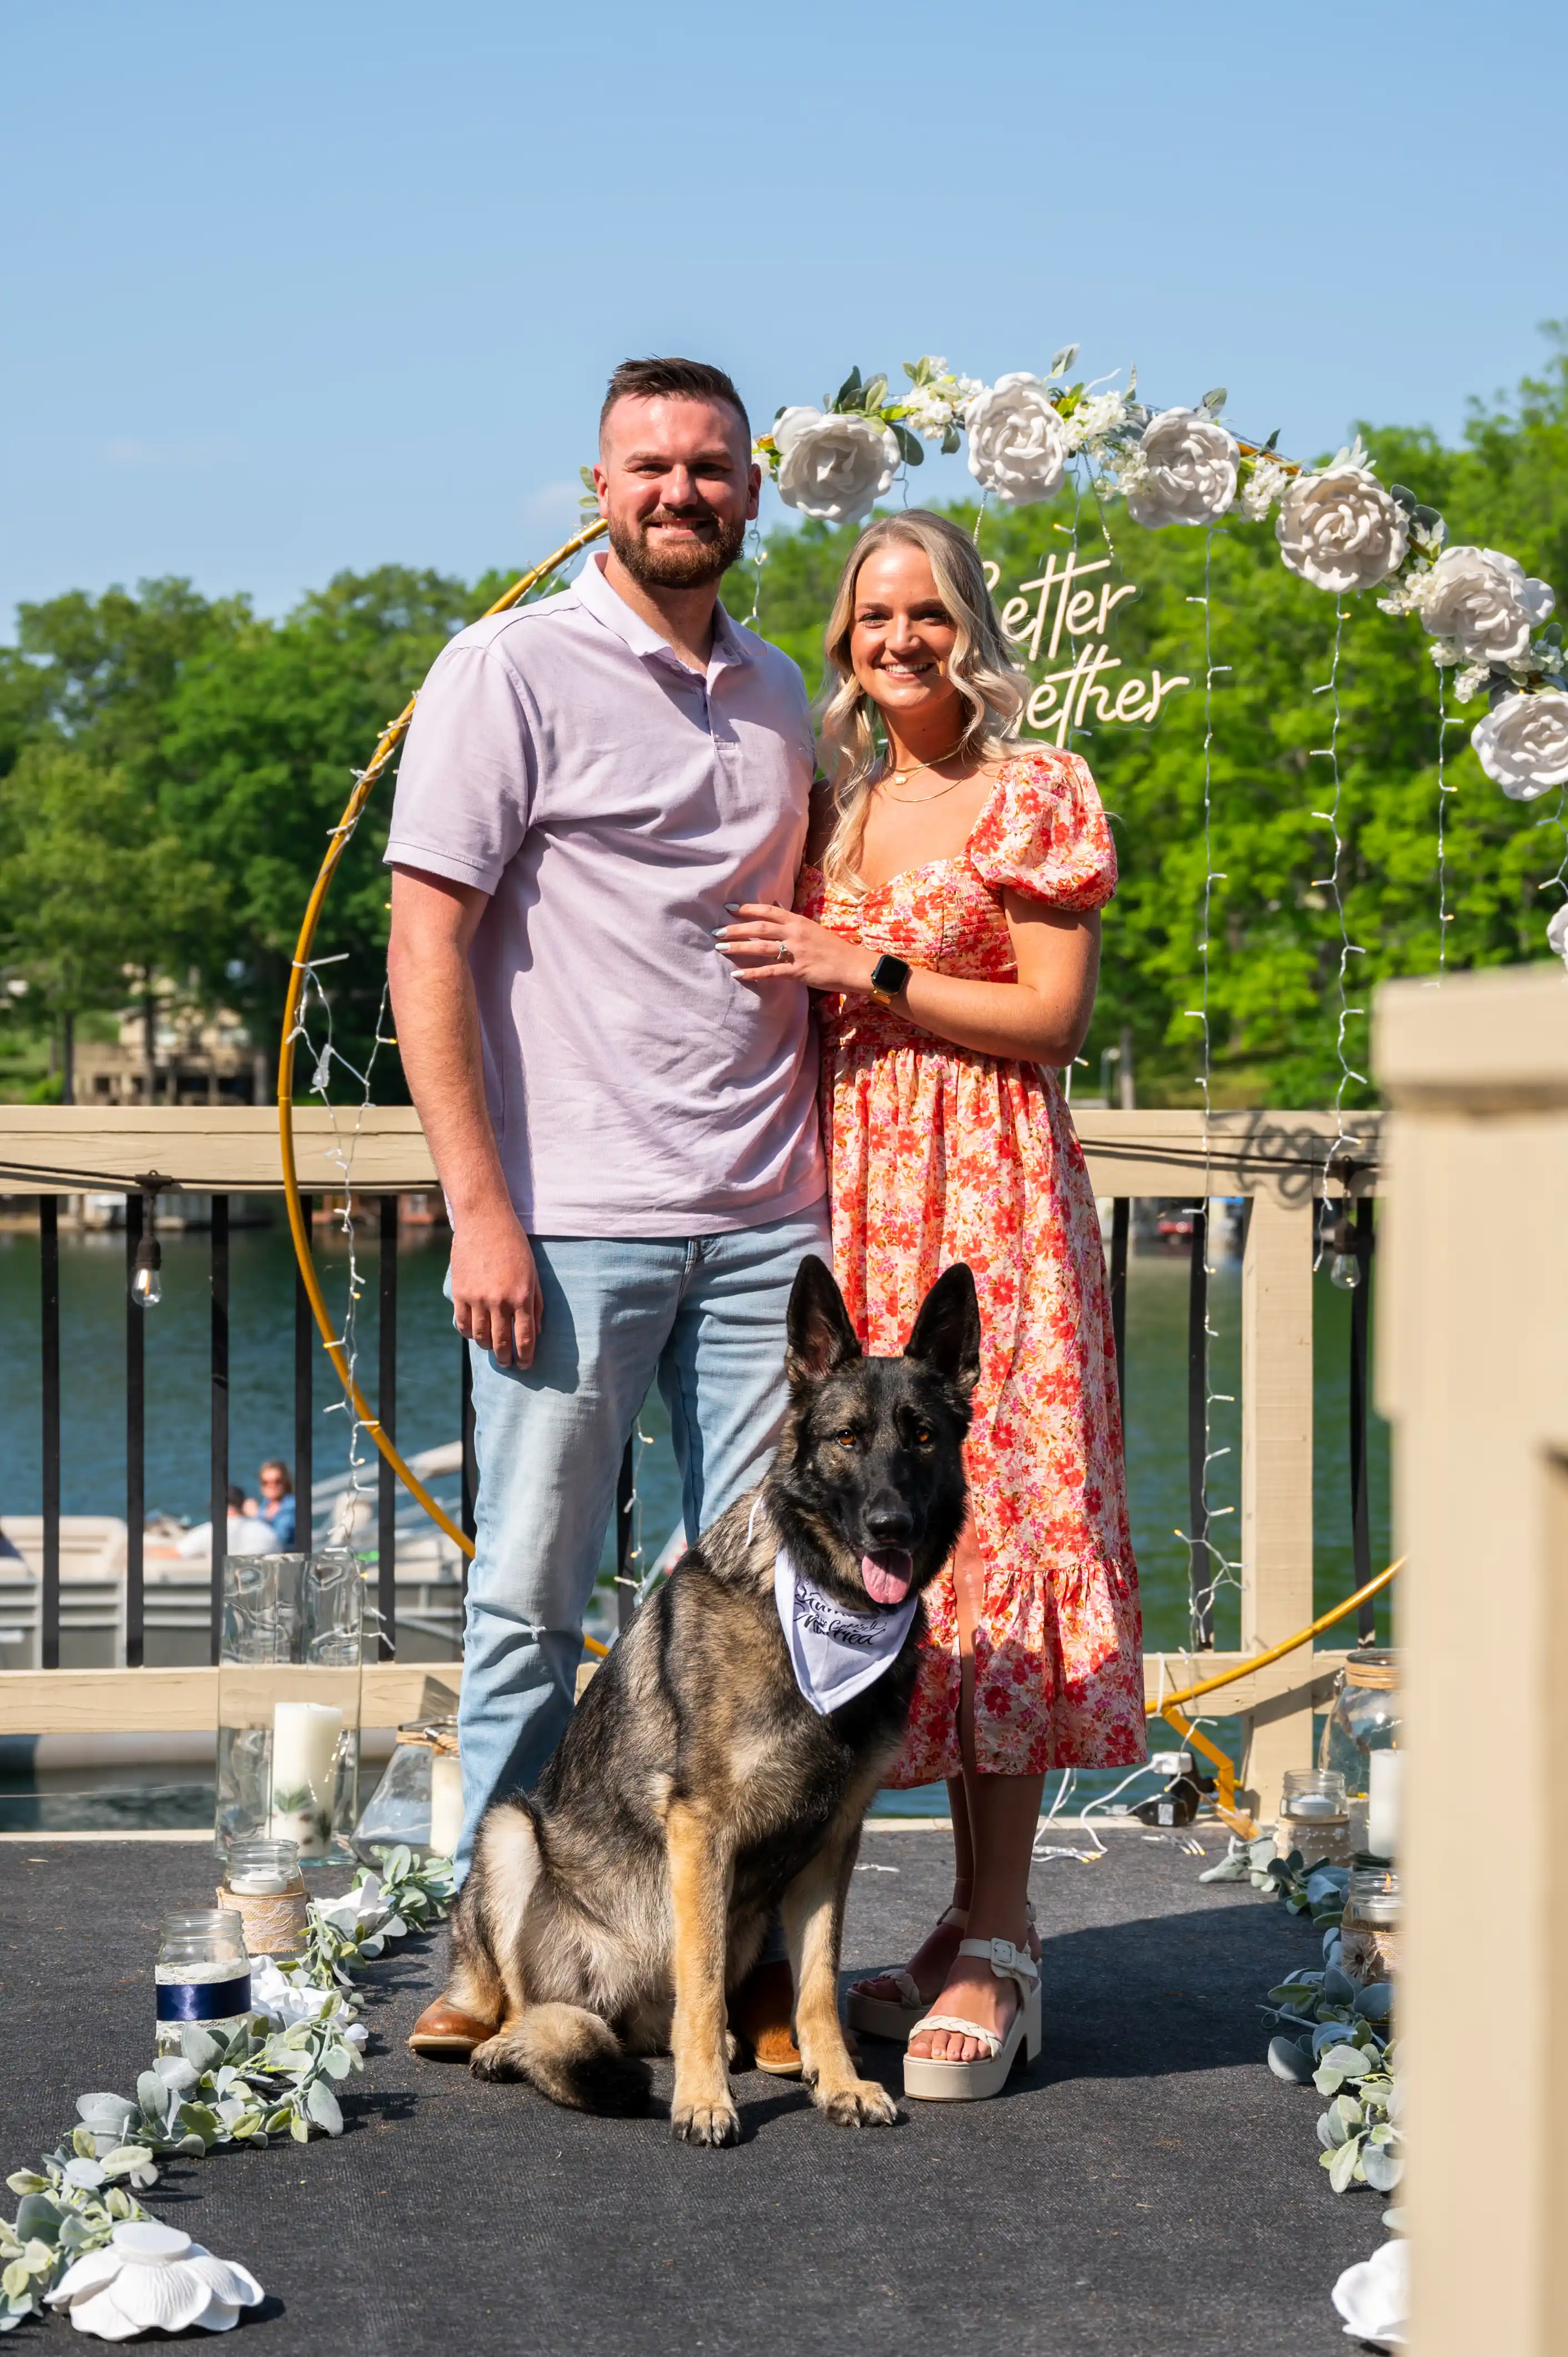 A smiling couple posing with a German Shepherd dog on a bridge with decorative foliage and flowers in the background.